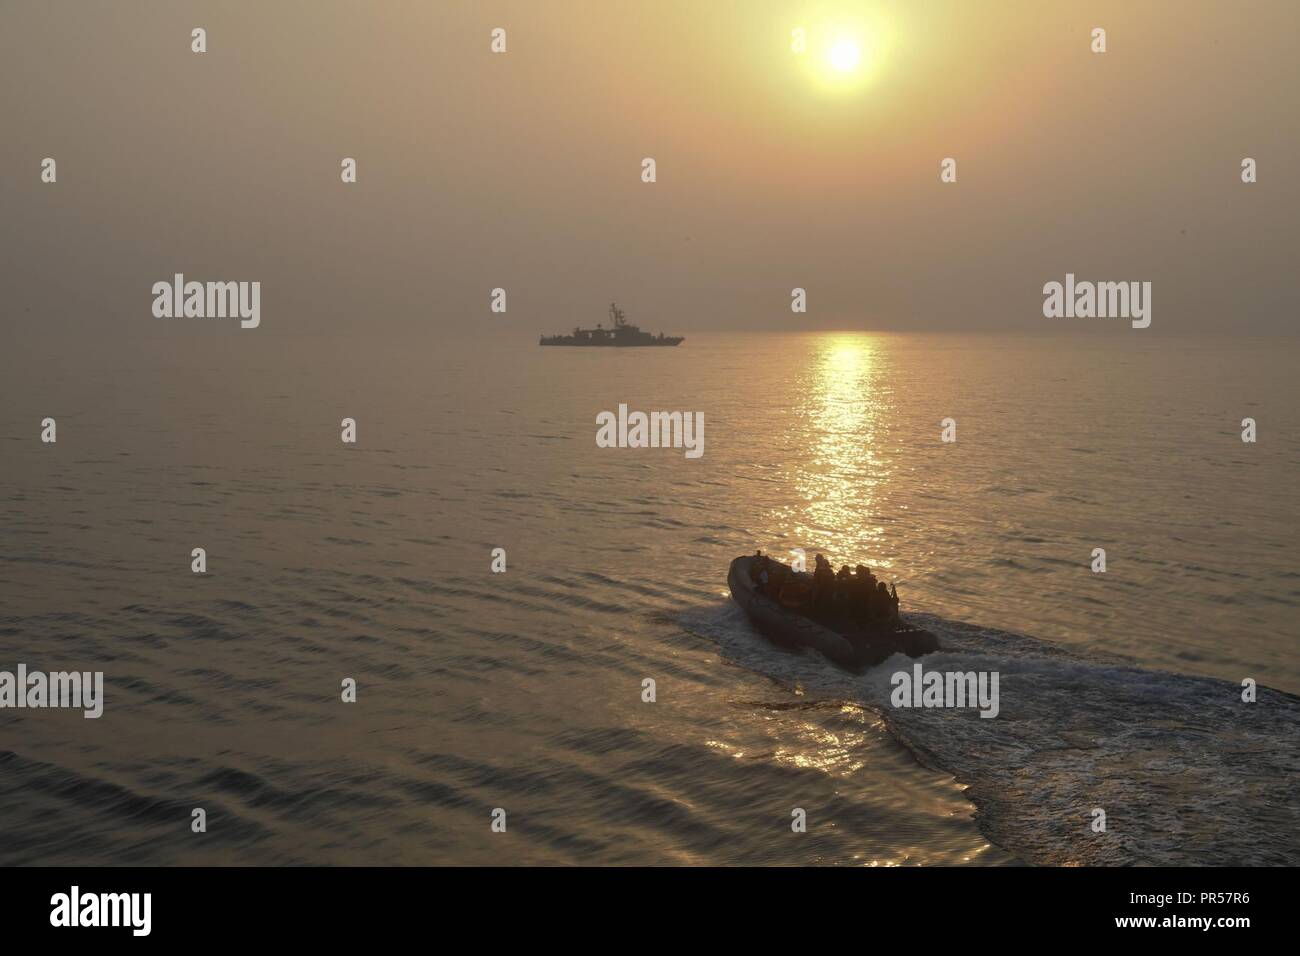 ARABIAN GULF (Sept. 16, 2018) A rigid-hull inflatable boat steers toward coastal patrol ship USS Thunderbolt (PC 12) prior to  a MK-60 Griffin guided missile system shoot. Ships attached to U.S. 5th Fleet's Task Force 55 are conducting Griffin surface-to-surface missile and naval gun exercises against high speed maneuvering targets to advance their ability to defend minesweepers and other coastal patrol ships. U.S. 5th Fleet and coalition assets are participating in numerous exercises as part of the greater Theater Counter Mine and Maritime Security Exercise to ensure maritime stability and se Stock Photo